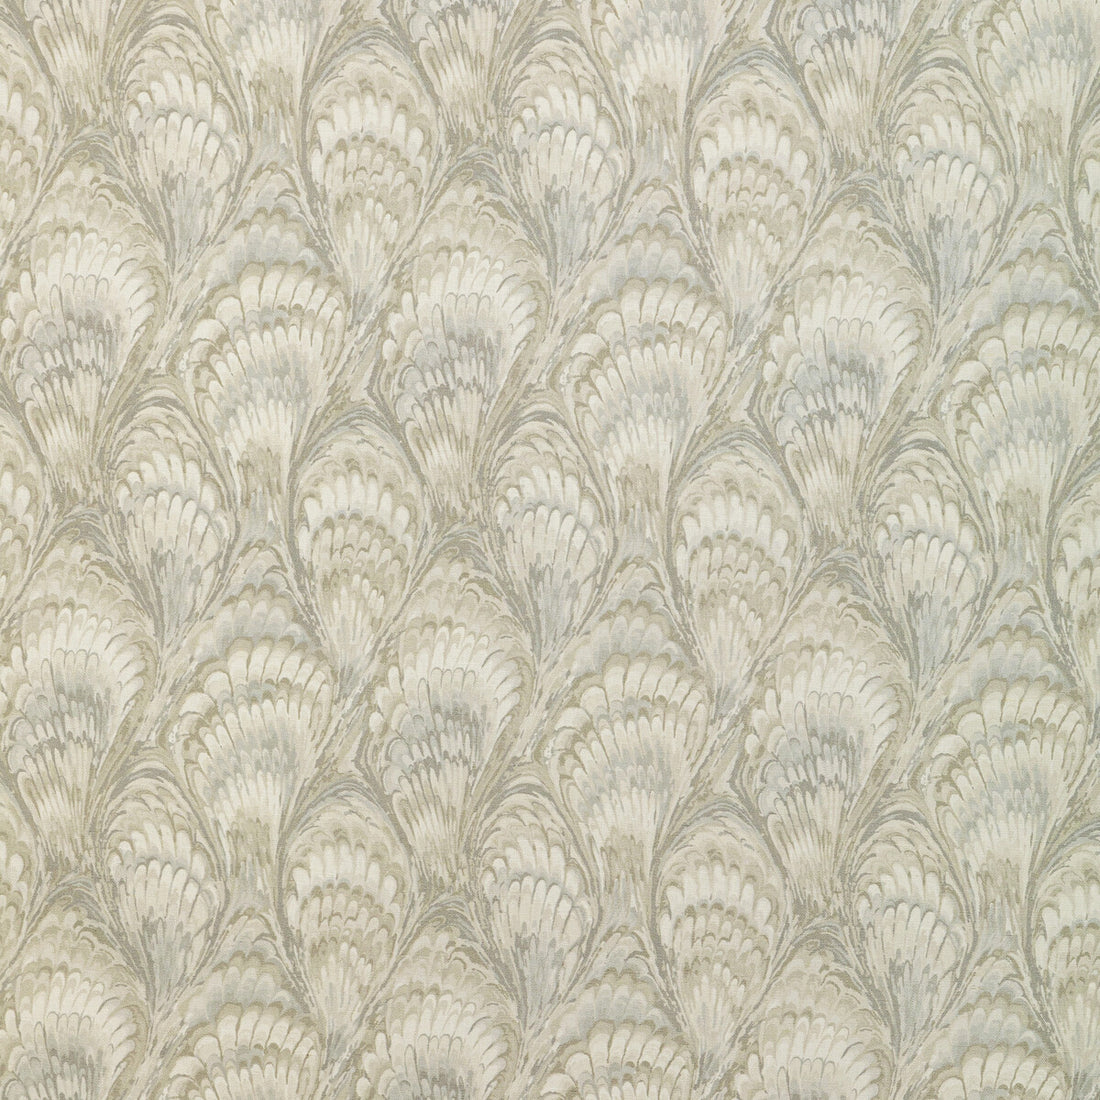 Torcello fabric in pewter color - pattern TORCELLO.52.0 - by Kravet Basics